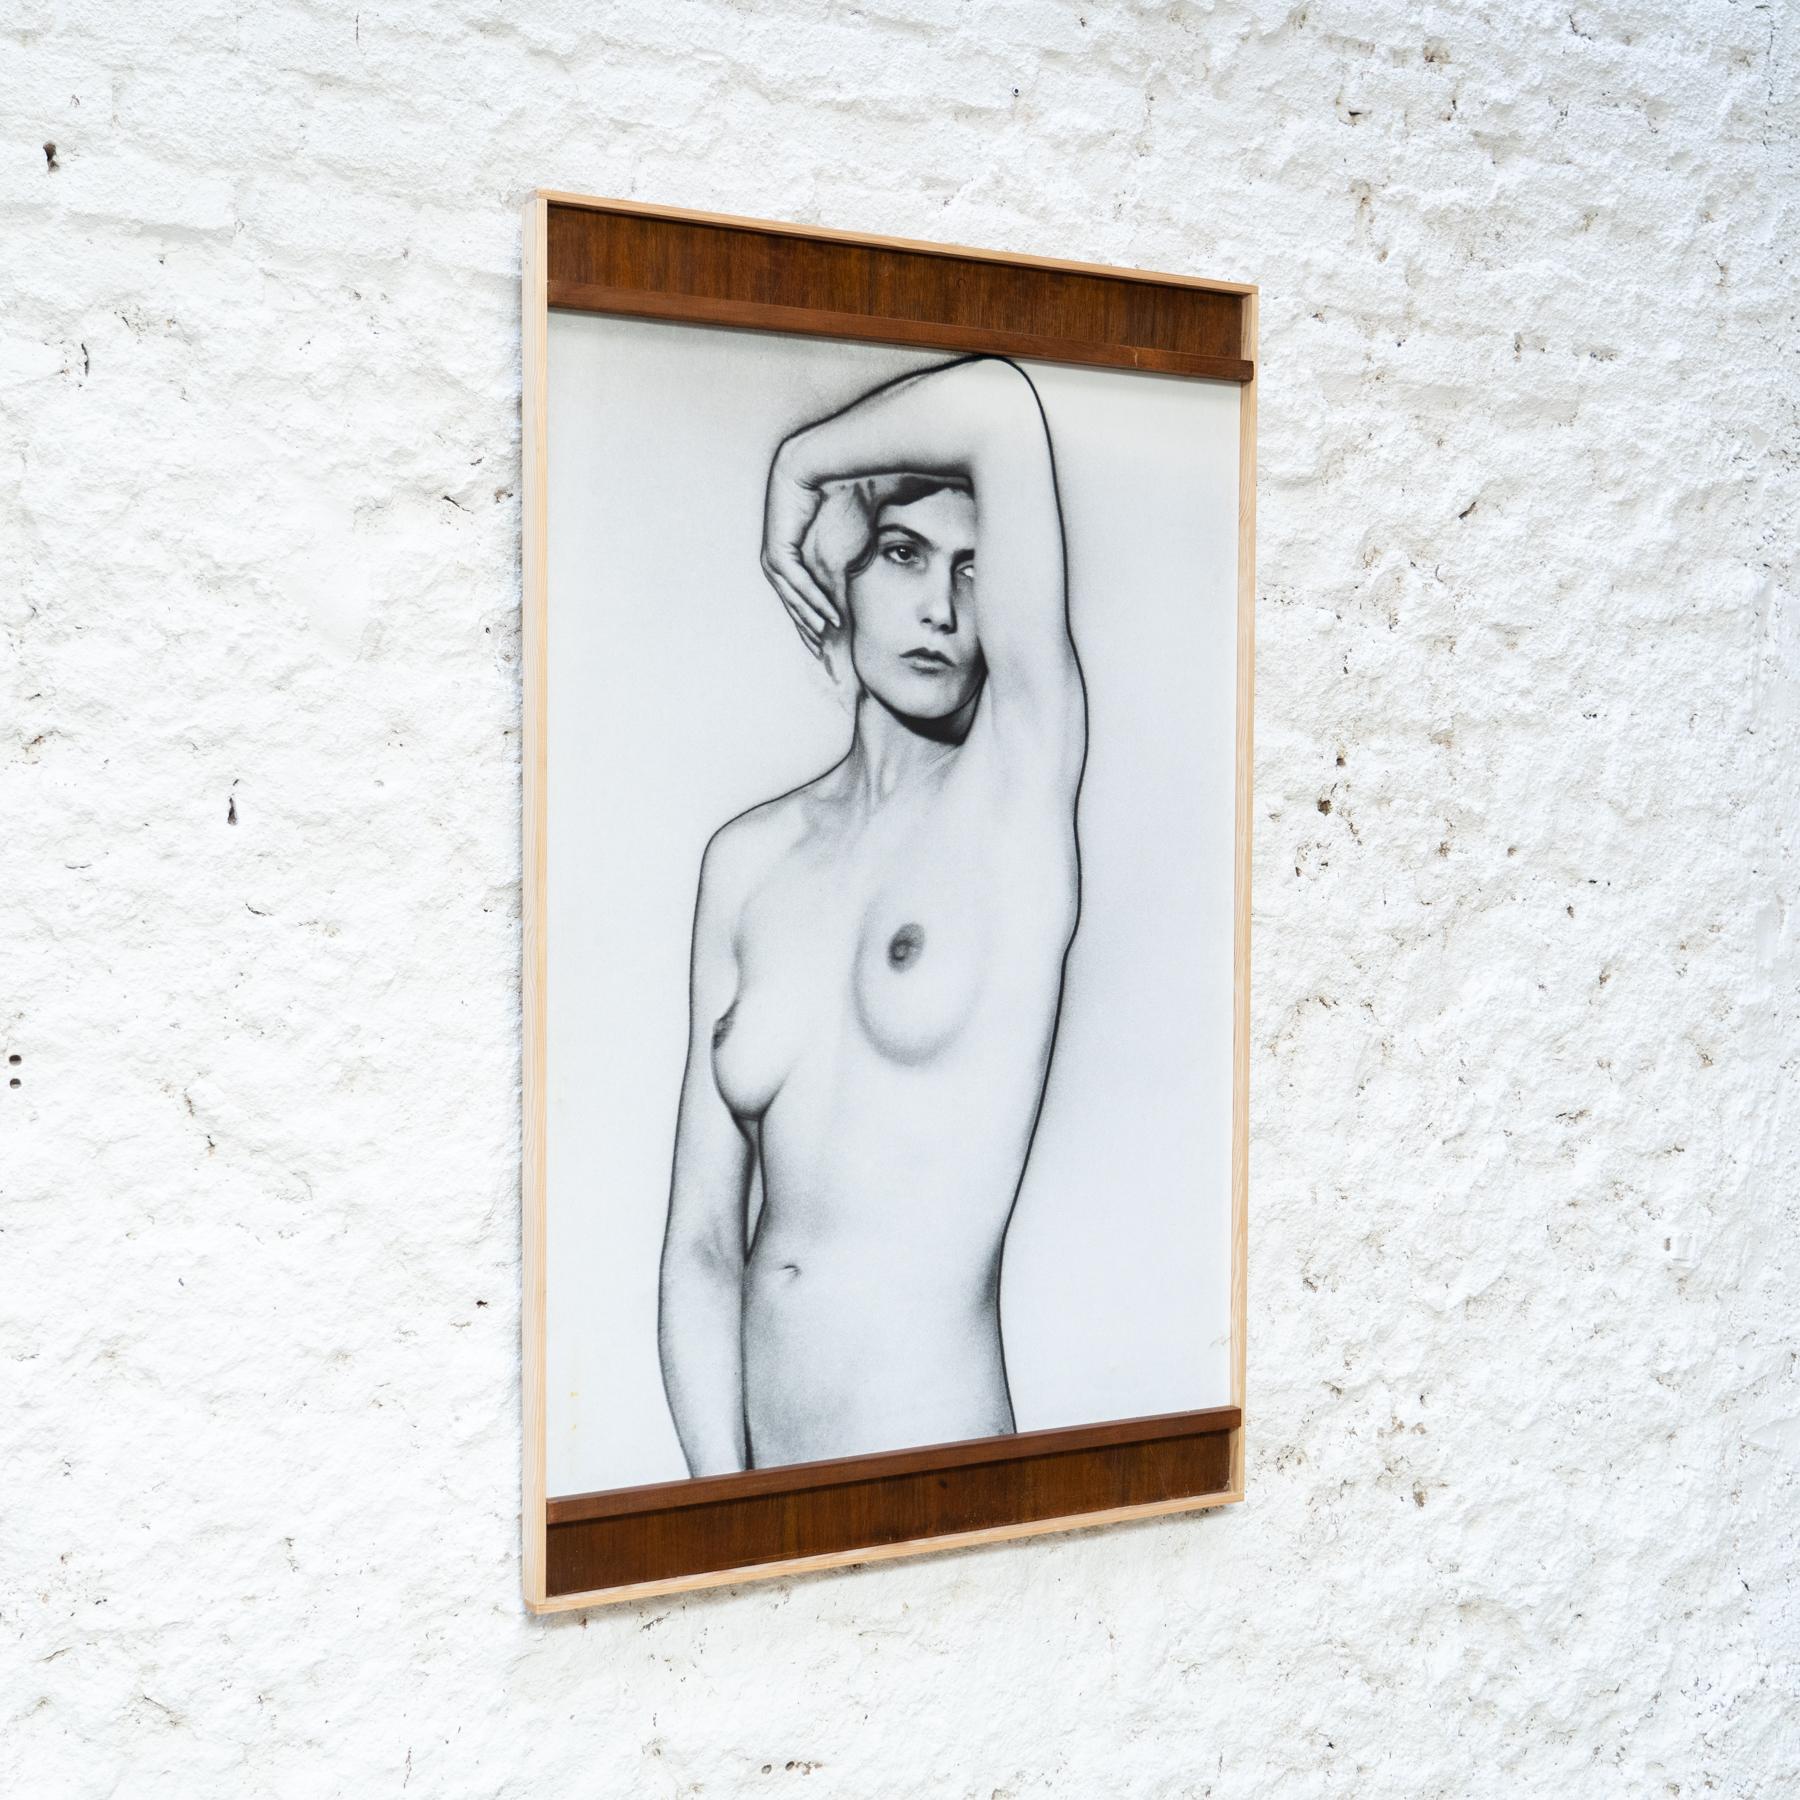 Mid-Century Modern Big Size Photographic Print Framed Composition by Man Ray “Solarised Nude” For Sale